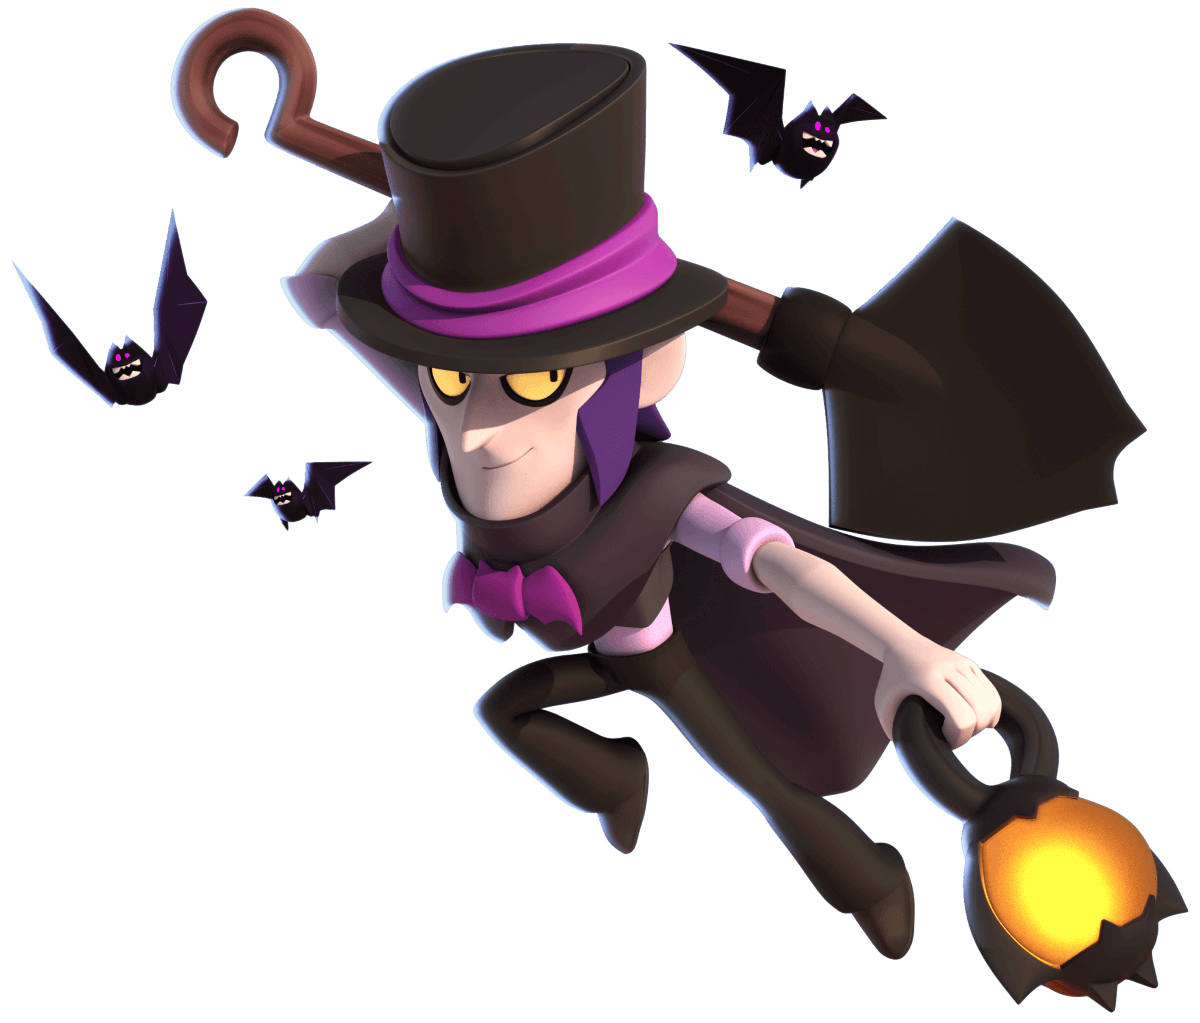 Everything about the Halloween Update coming to Brawl Stars!